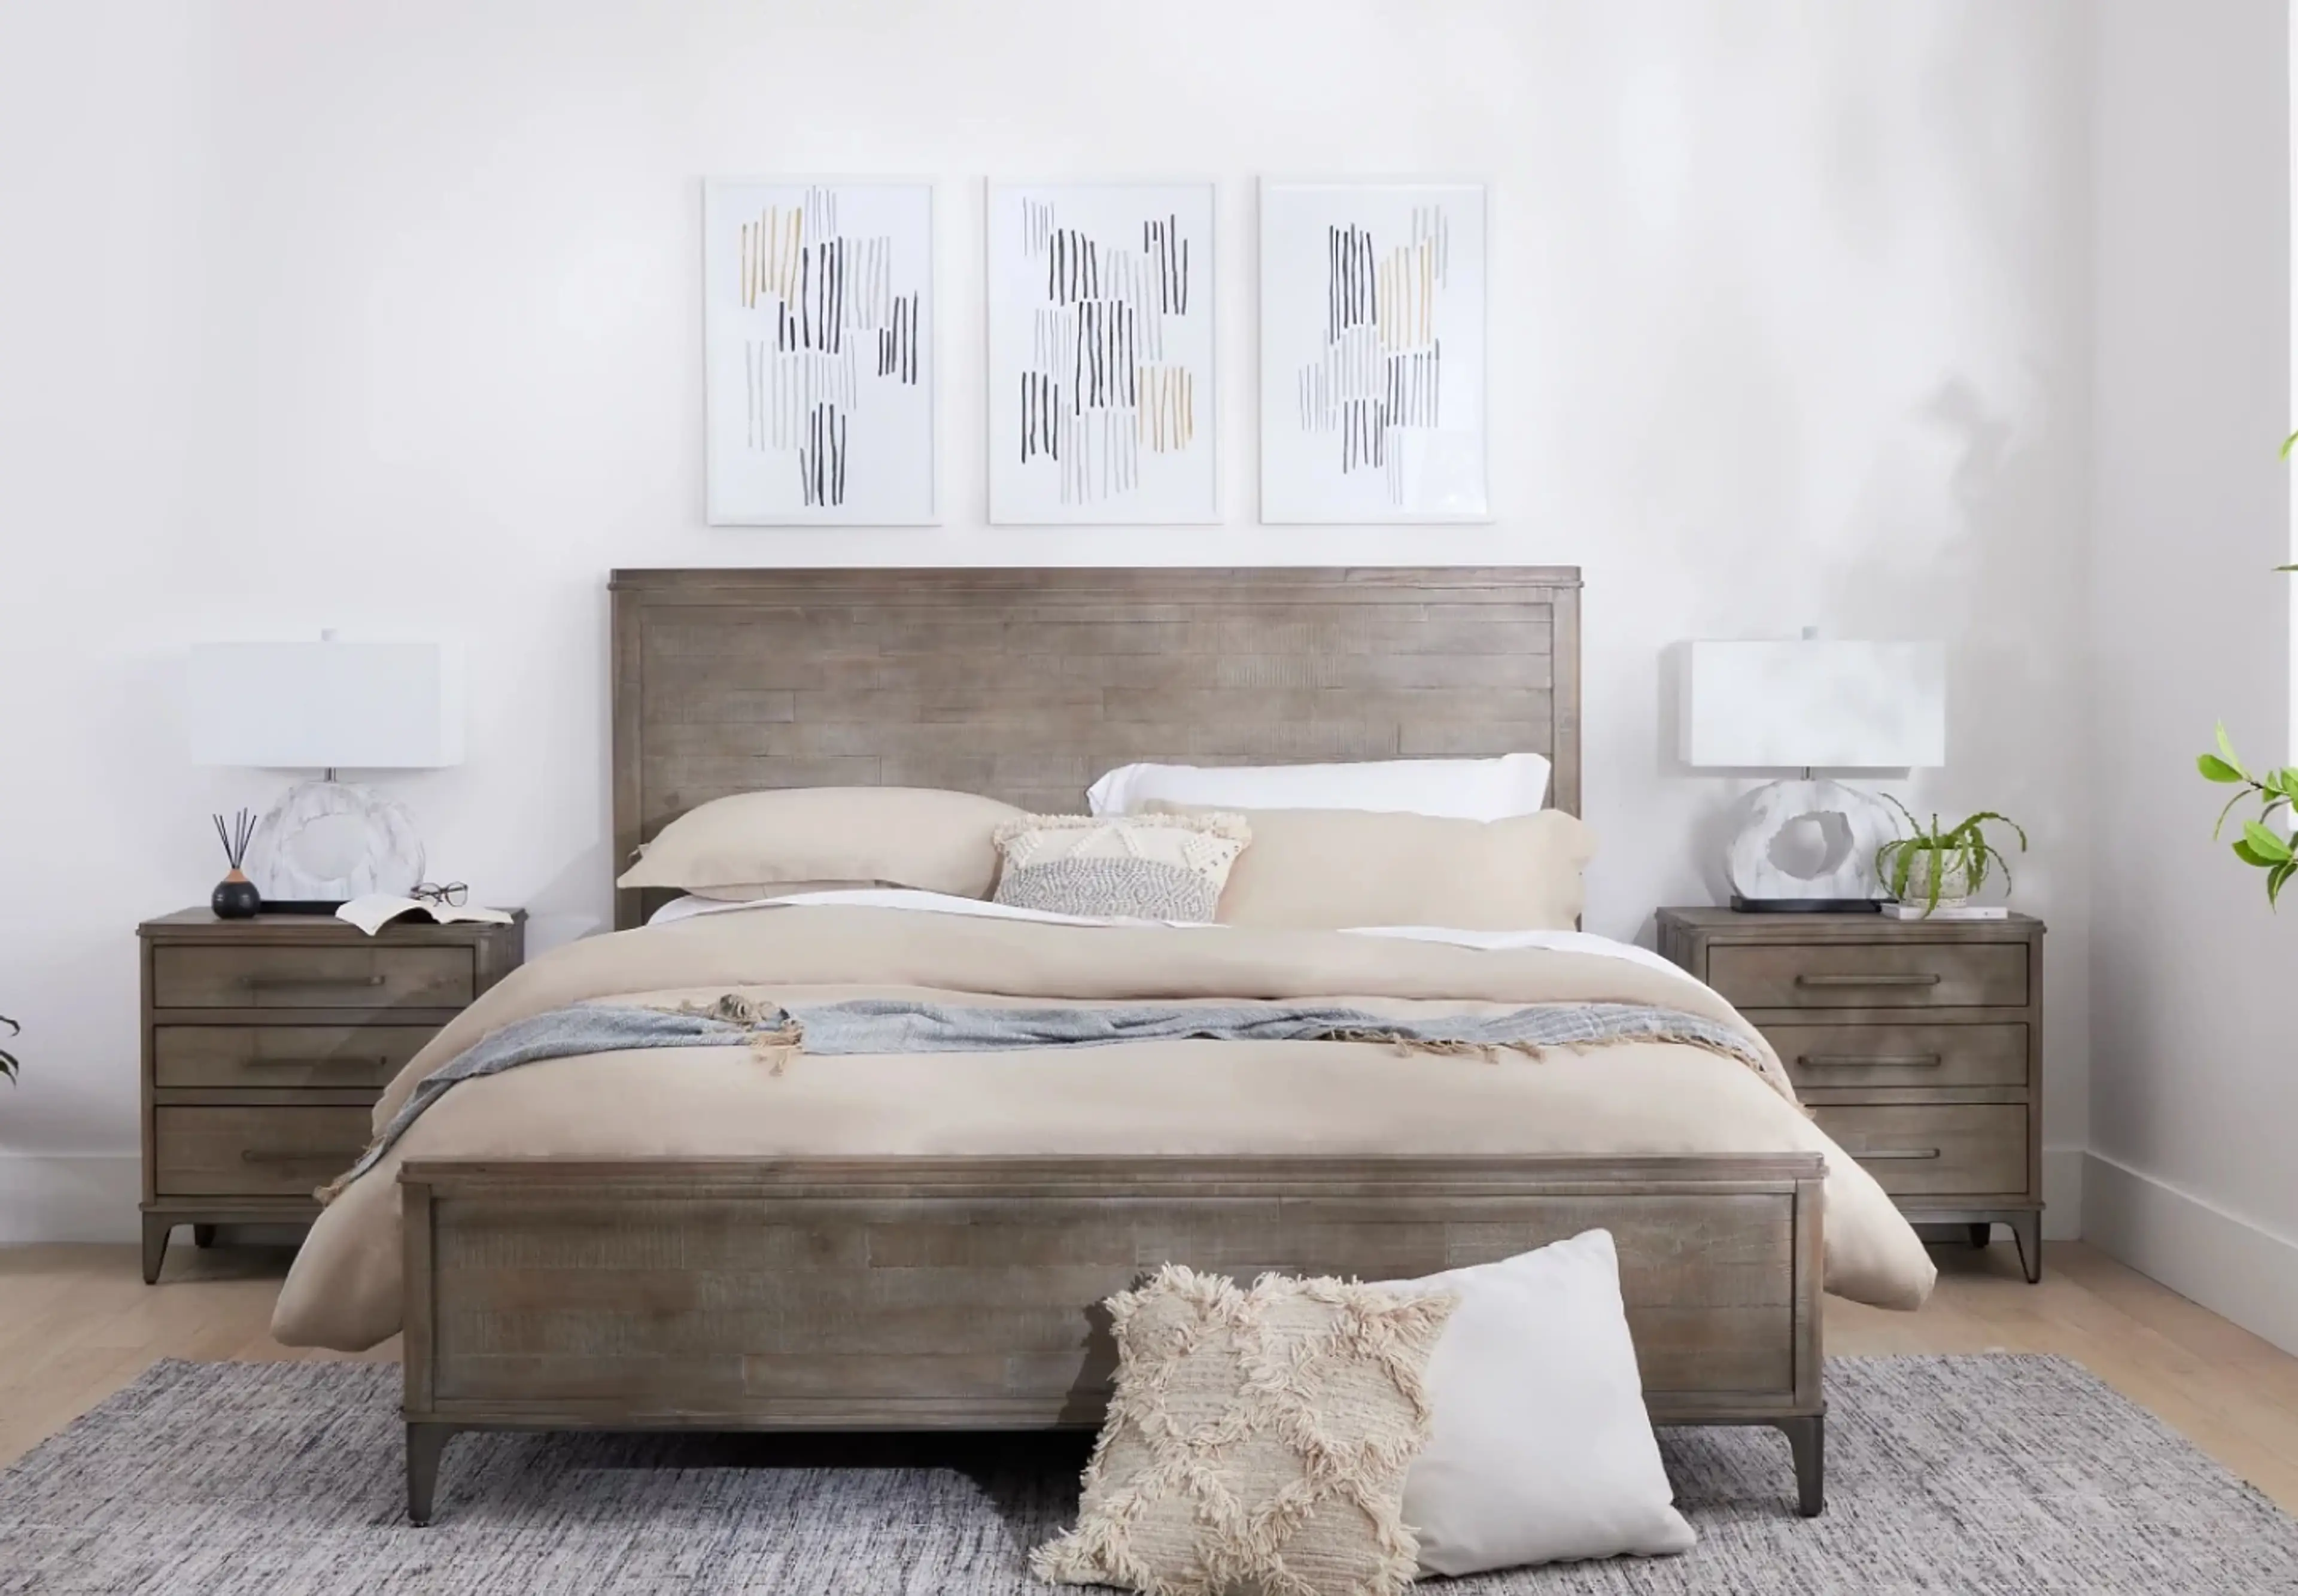 A Buyers Guide: The Advantages of Choosing A Bedroom Set